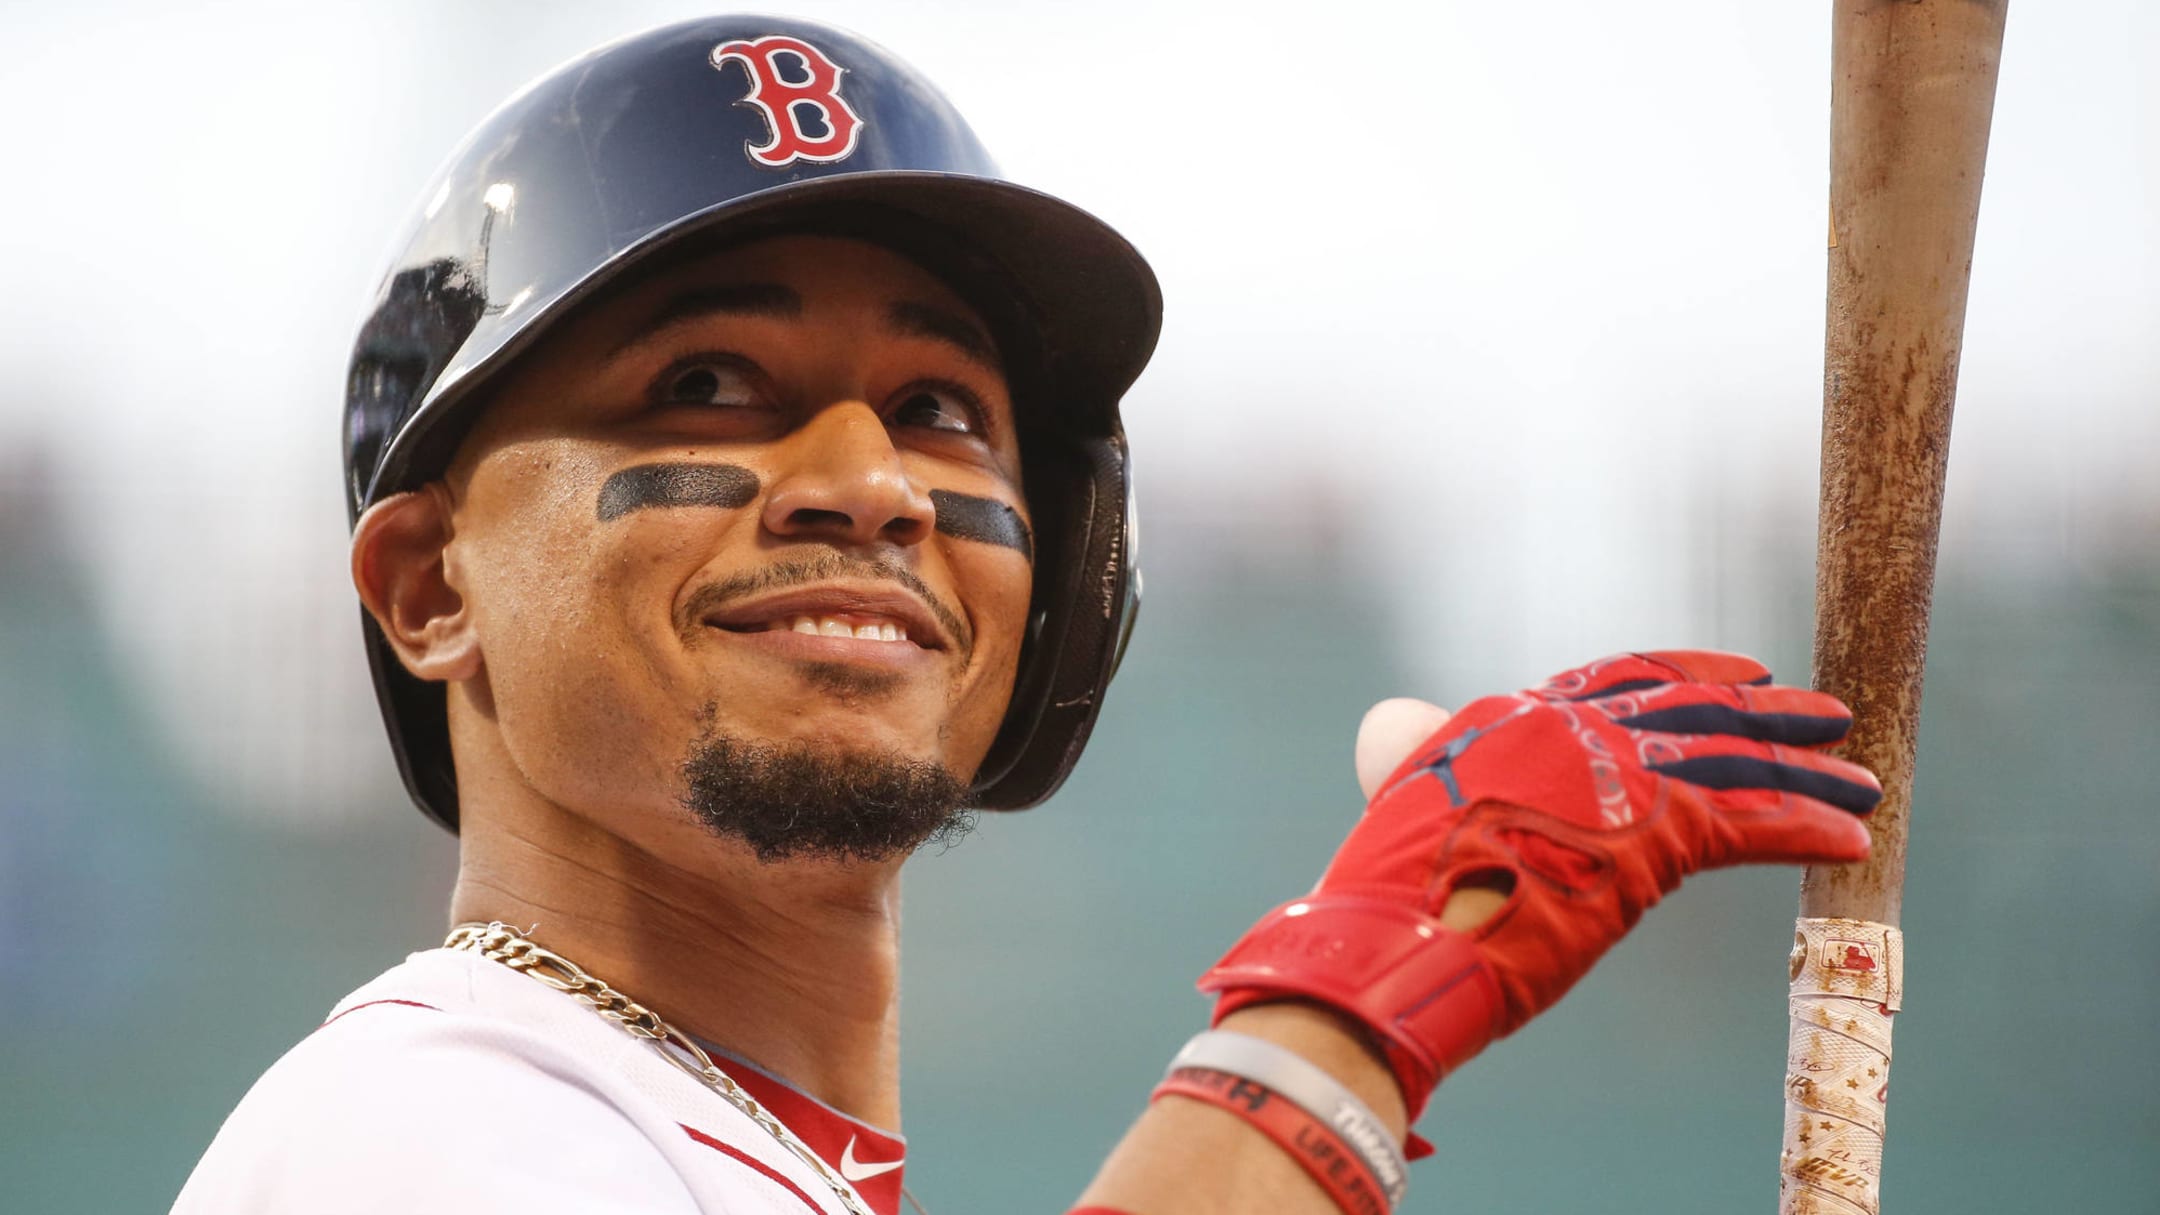 Verdugo showing why he was coveted in Betts' deal